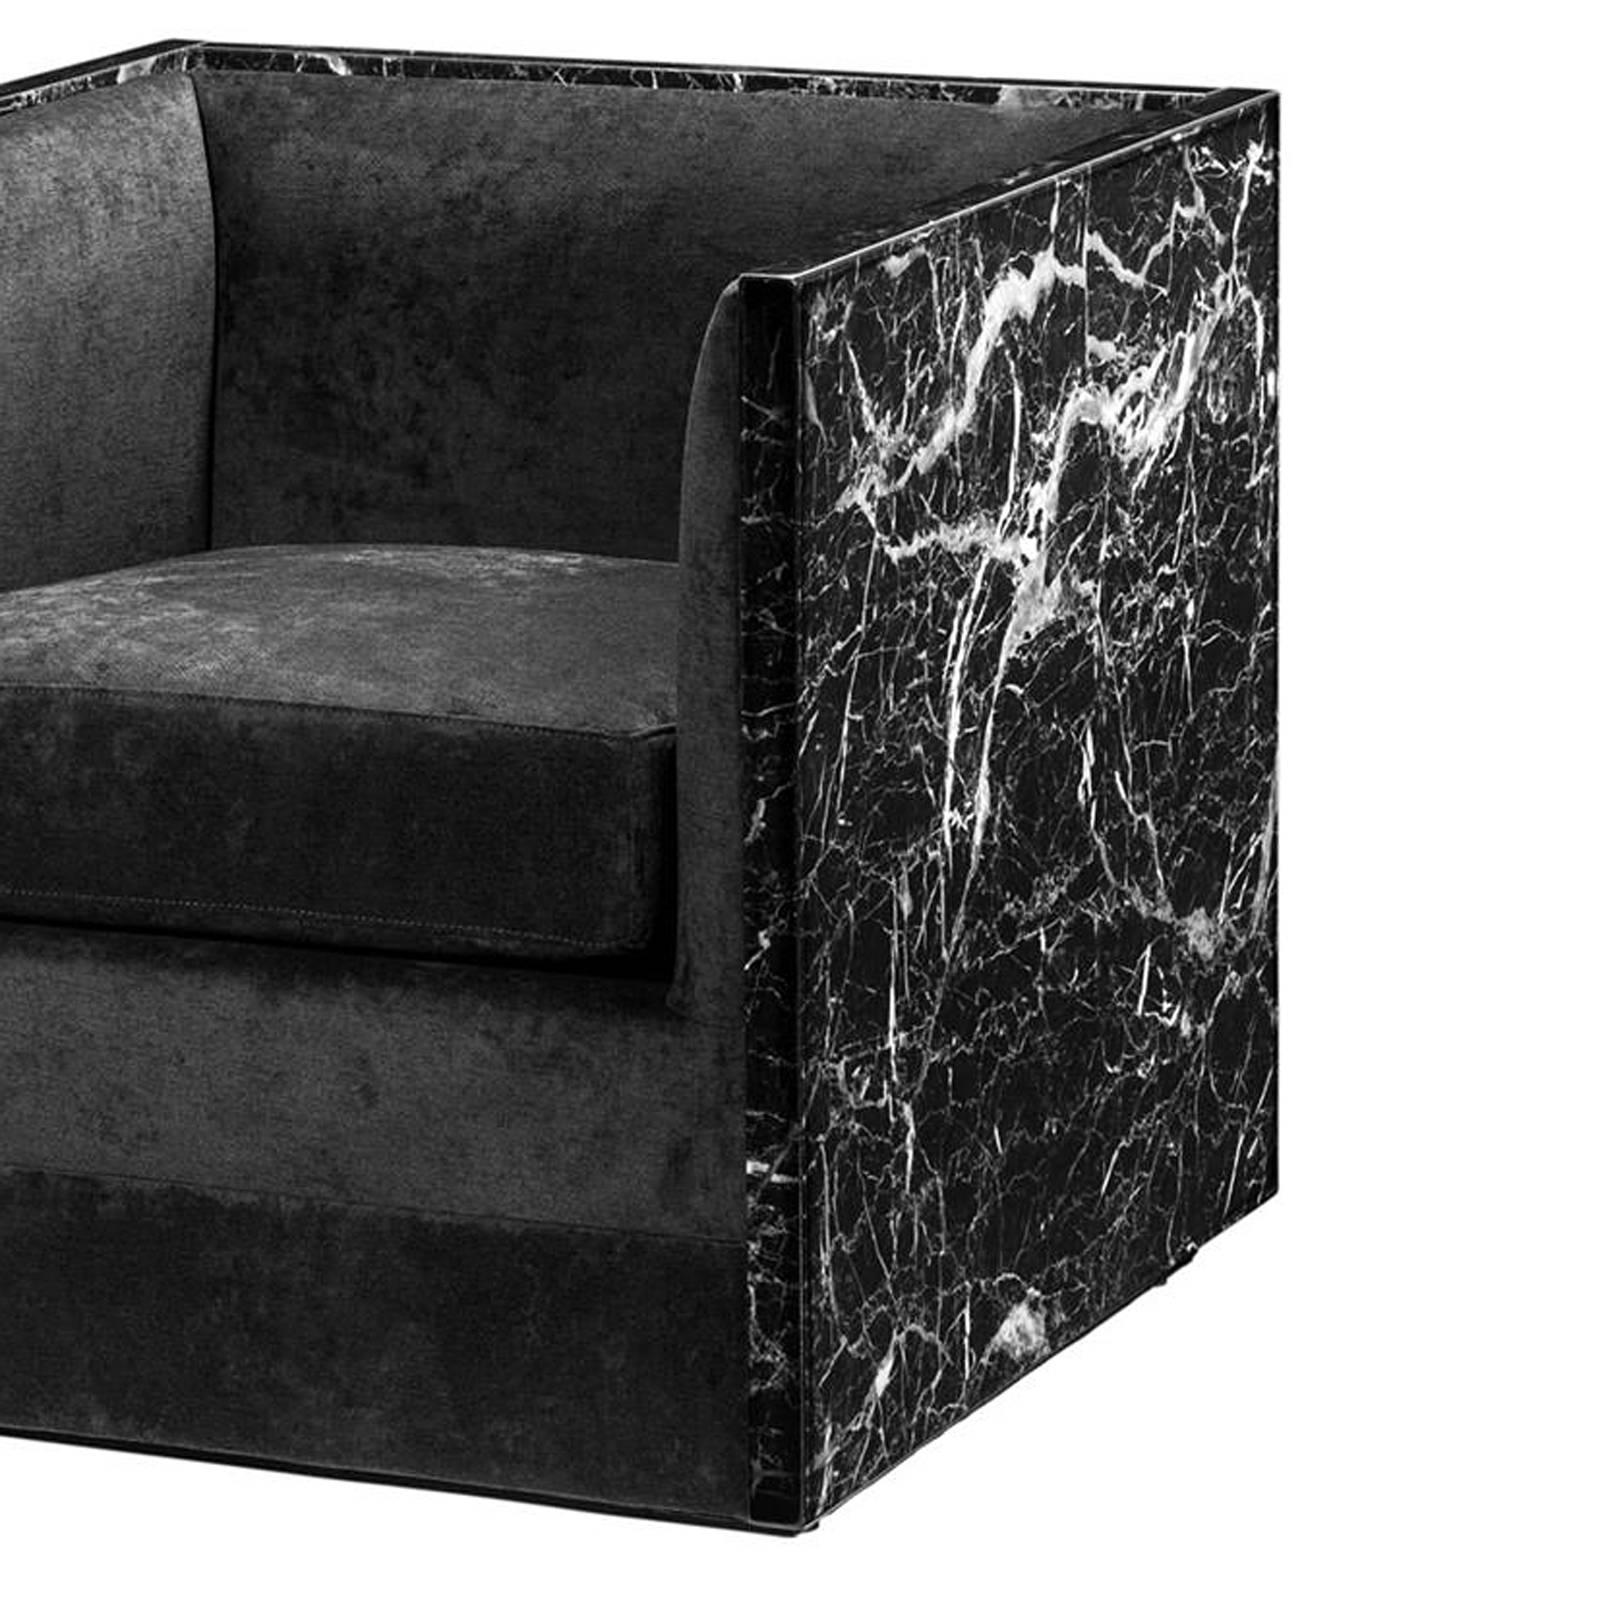 Armchair style black marble in black faux marble.
Very similar to real marble. Black velvet fabric.
